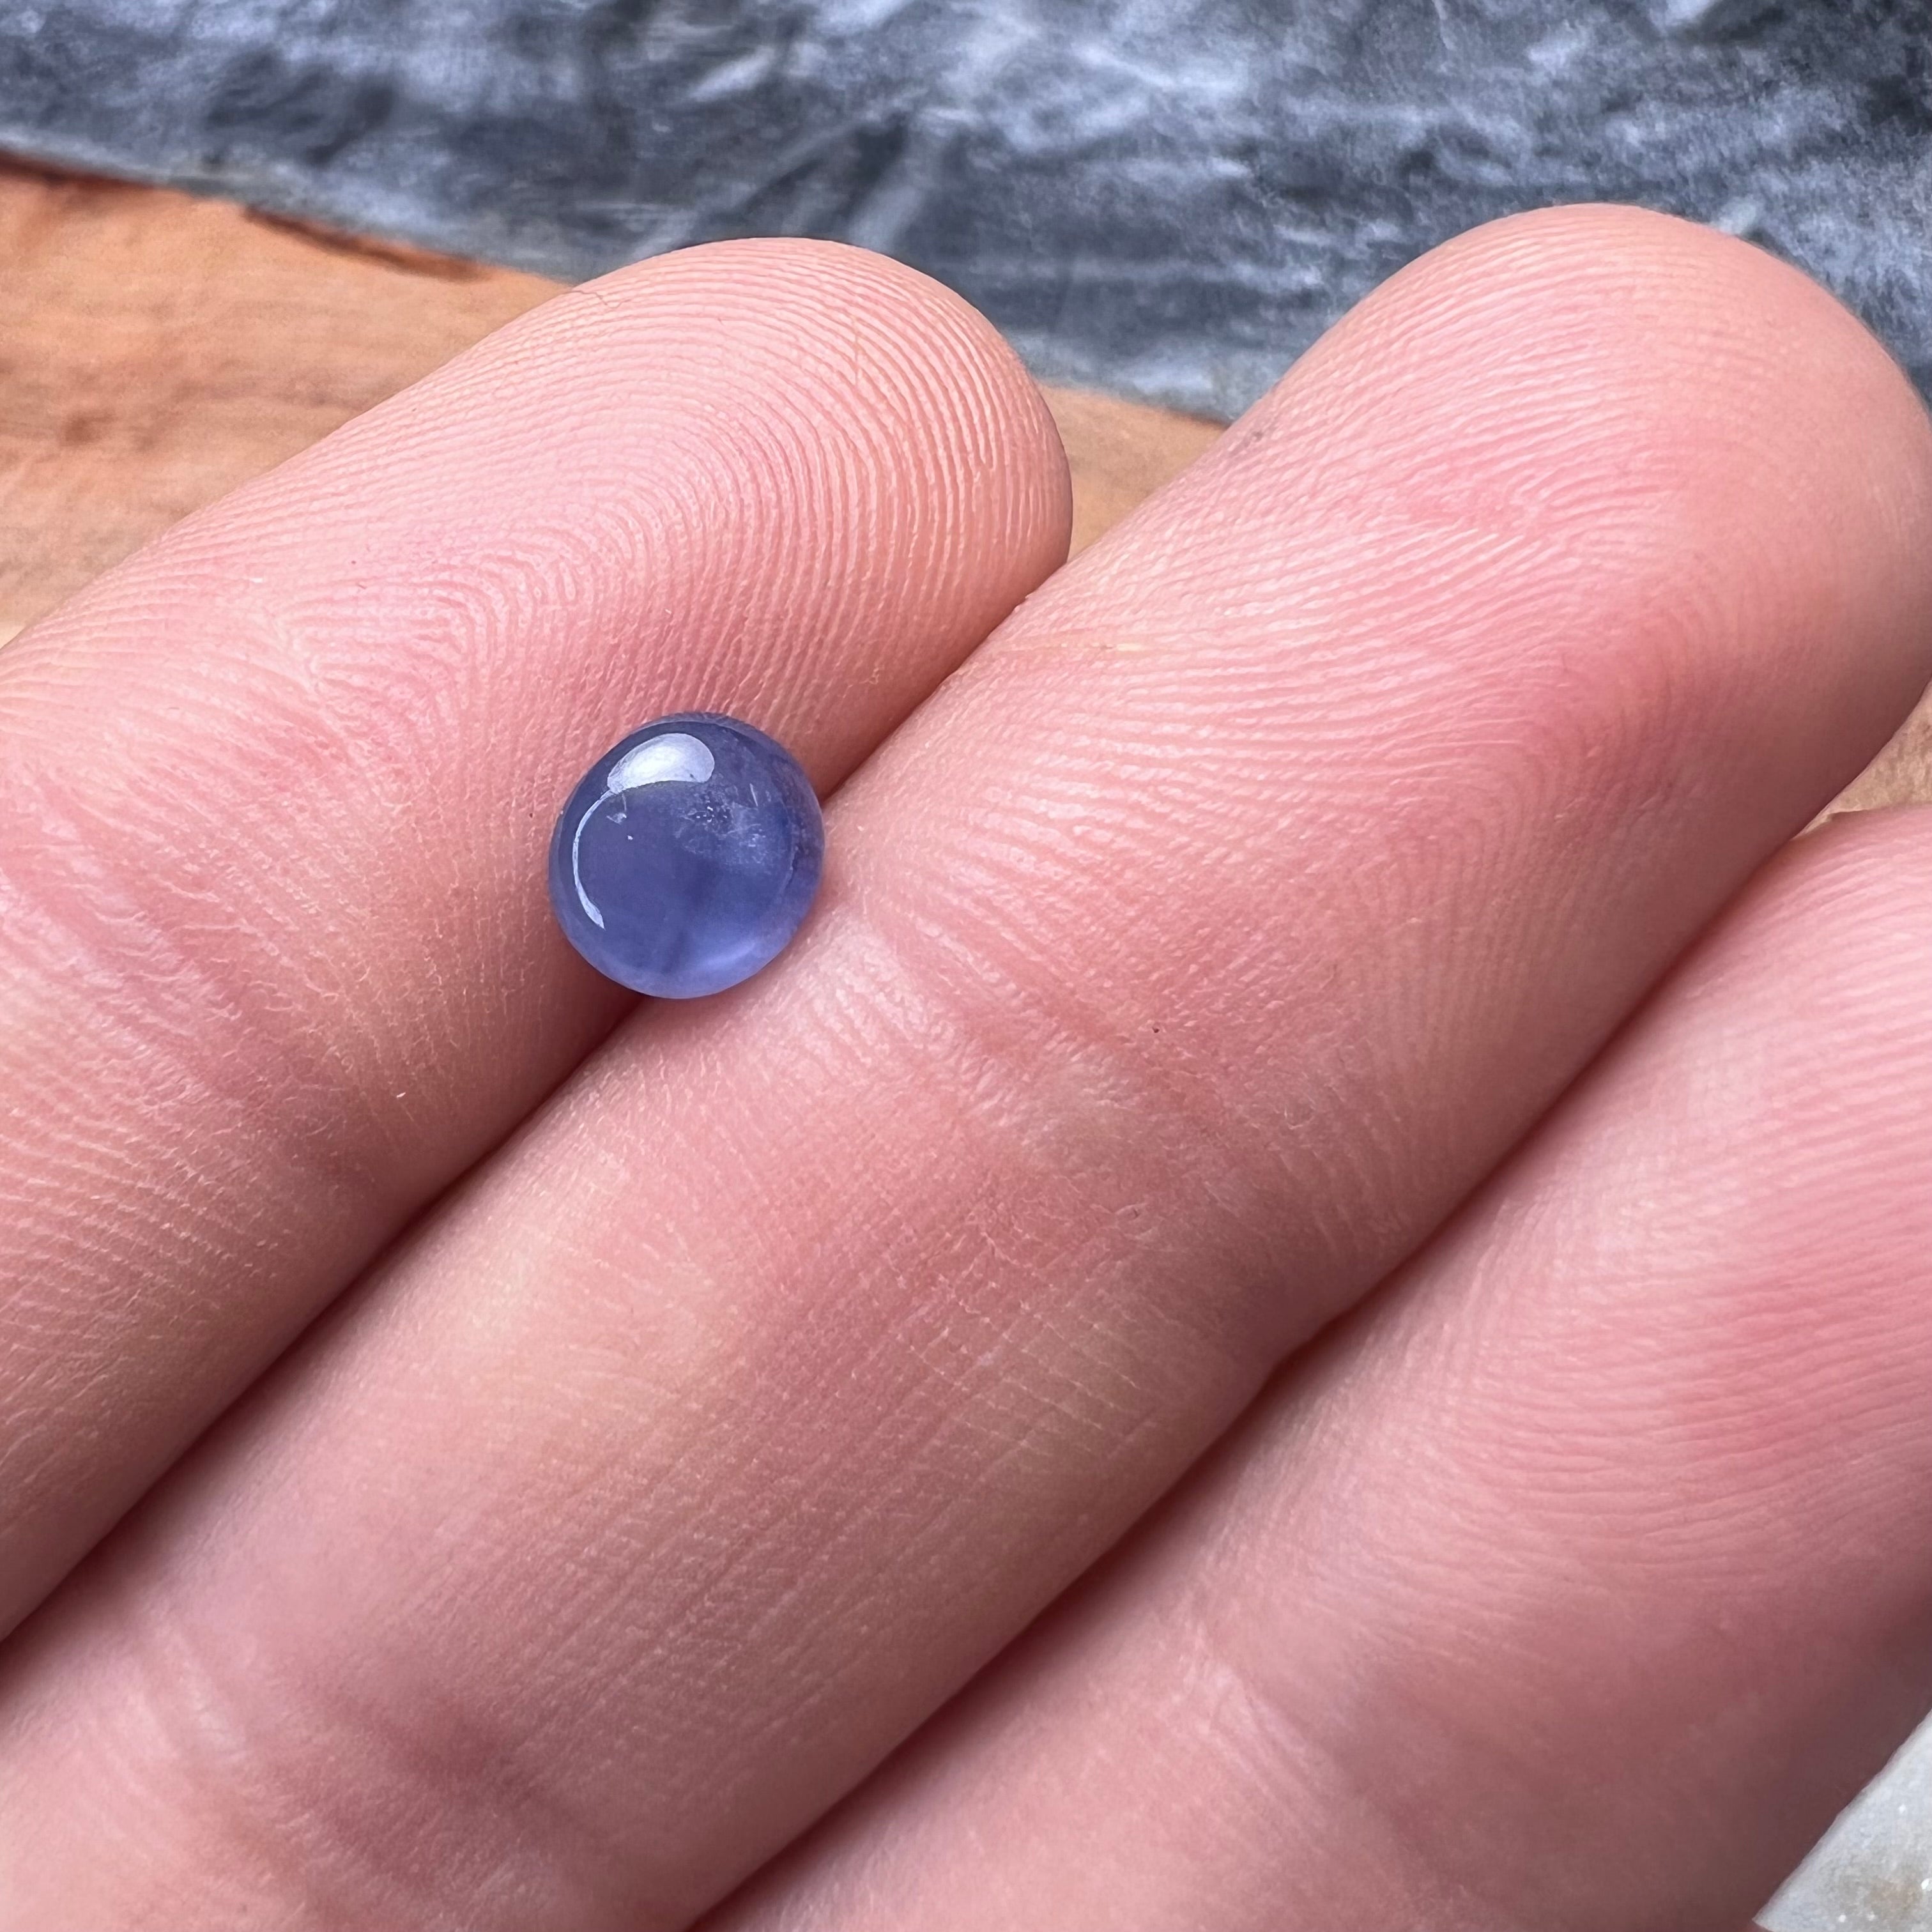 1.17CTW Loose Natural Cabochon Sapphire 5.96x2.82mm Earth mined Gemstone